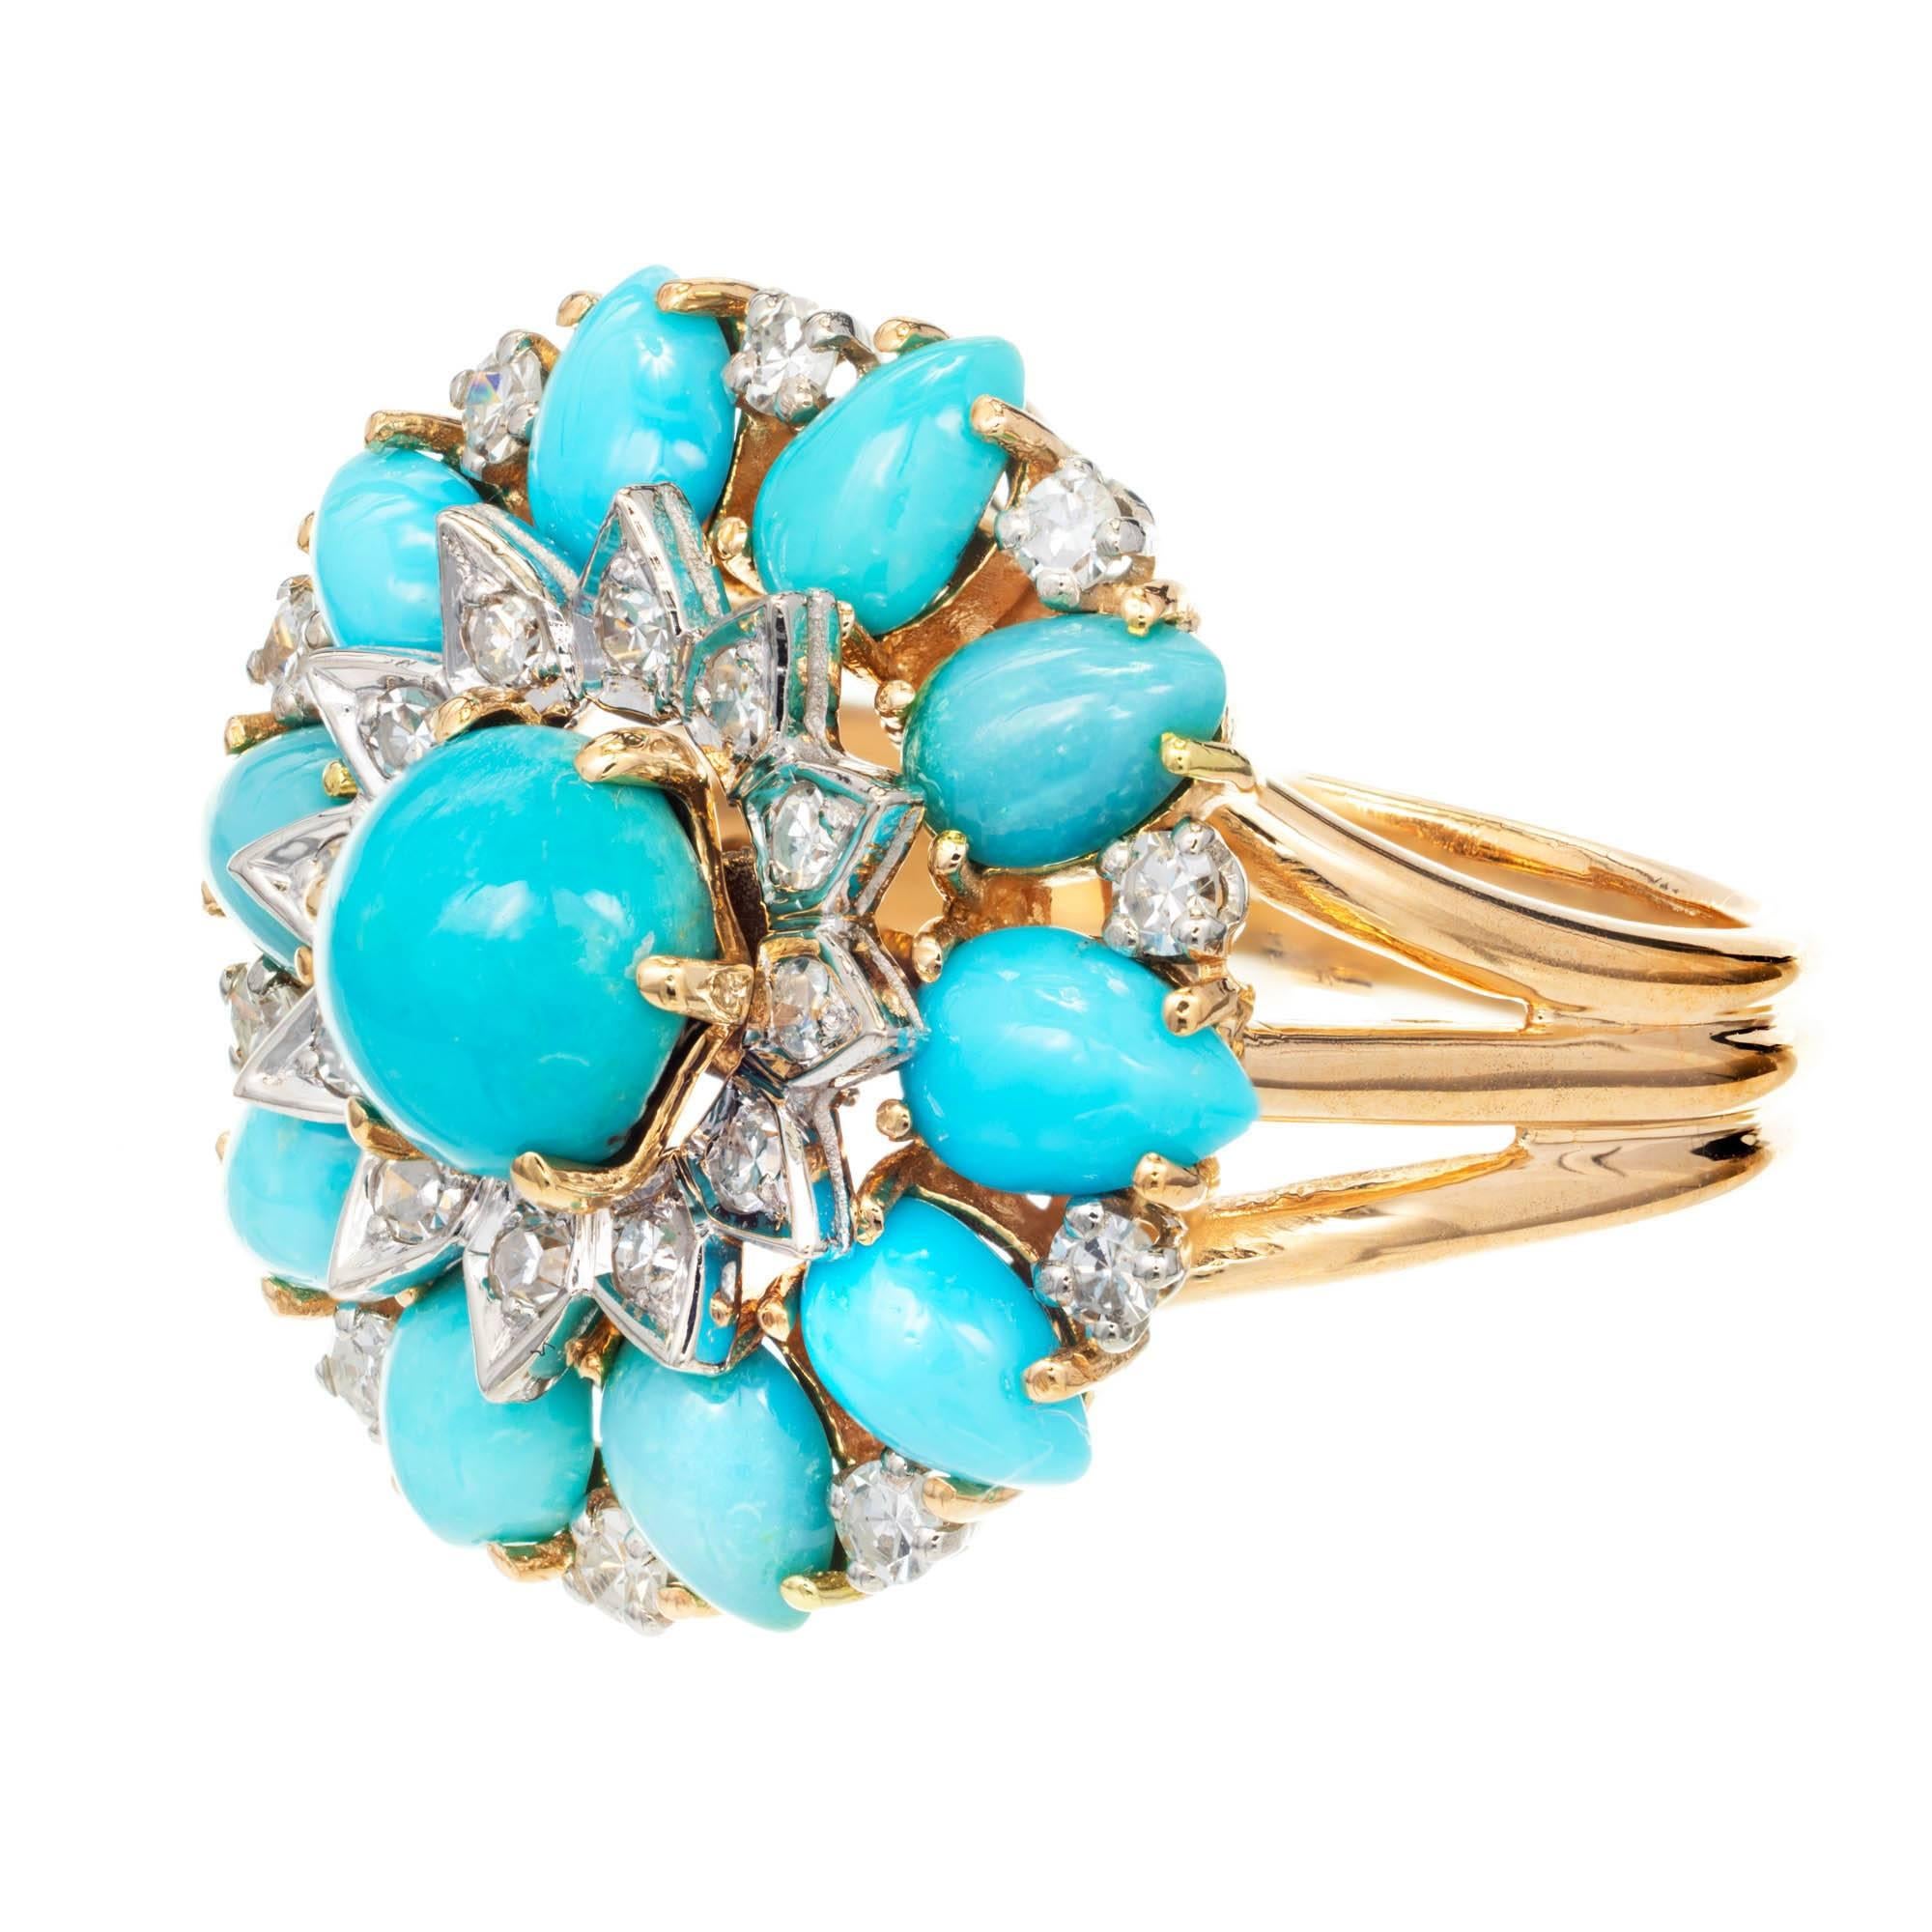 Persian natural untreated turquoise and diamond cluster cocktail ring. Handmade in France Circa 1950s in 18k Gold with single cut diamonds and bright high luster. GIA certified natural Persian turquoise.

1 round cabochon turquoise greenish blue